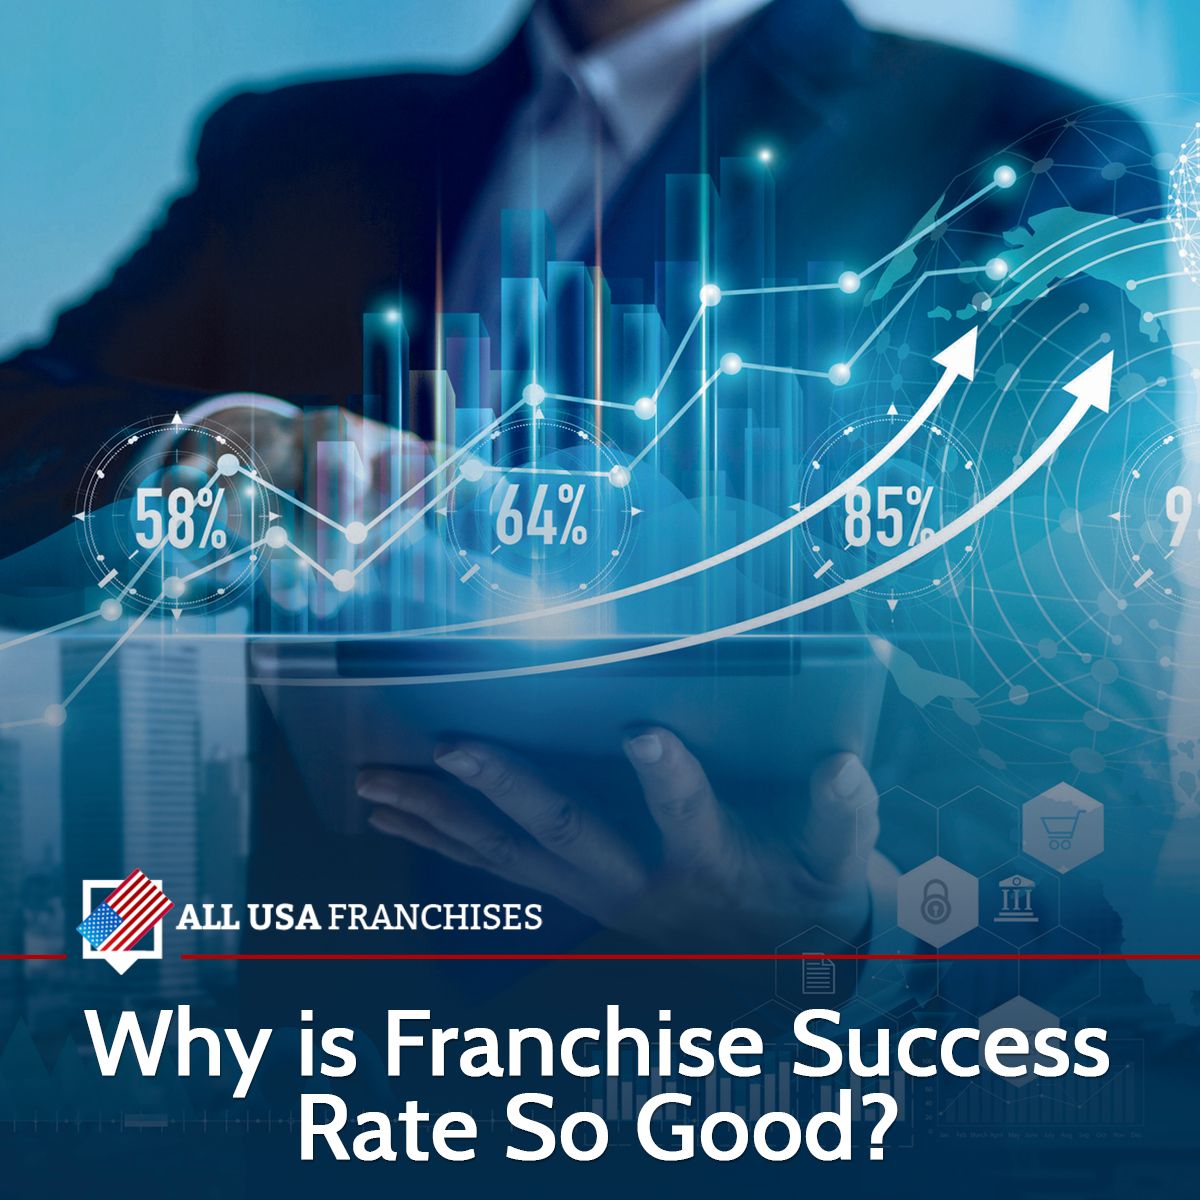 Why is Franchise Success Rate So Good?